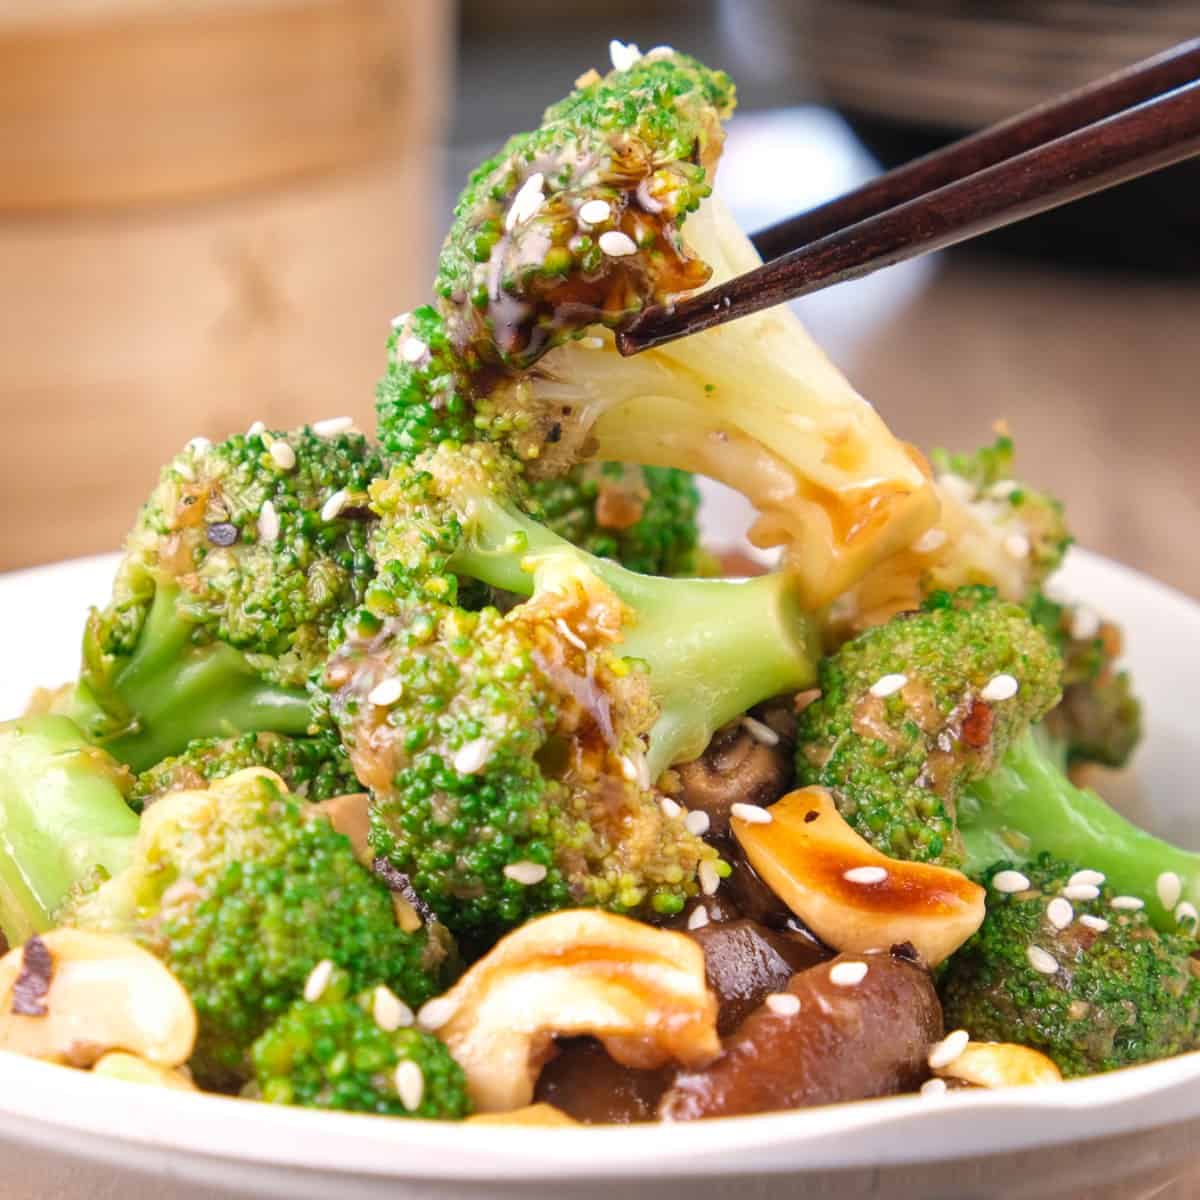 Stir-fried broccoli and mushrooms cooked in an Asian sauce, with a piece of broccoli being picked up using chopsticks.